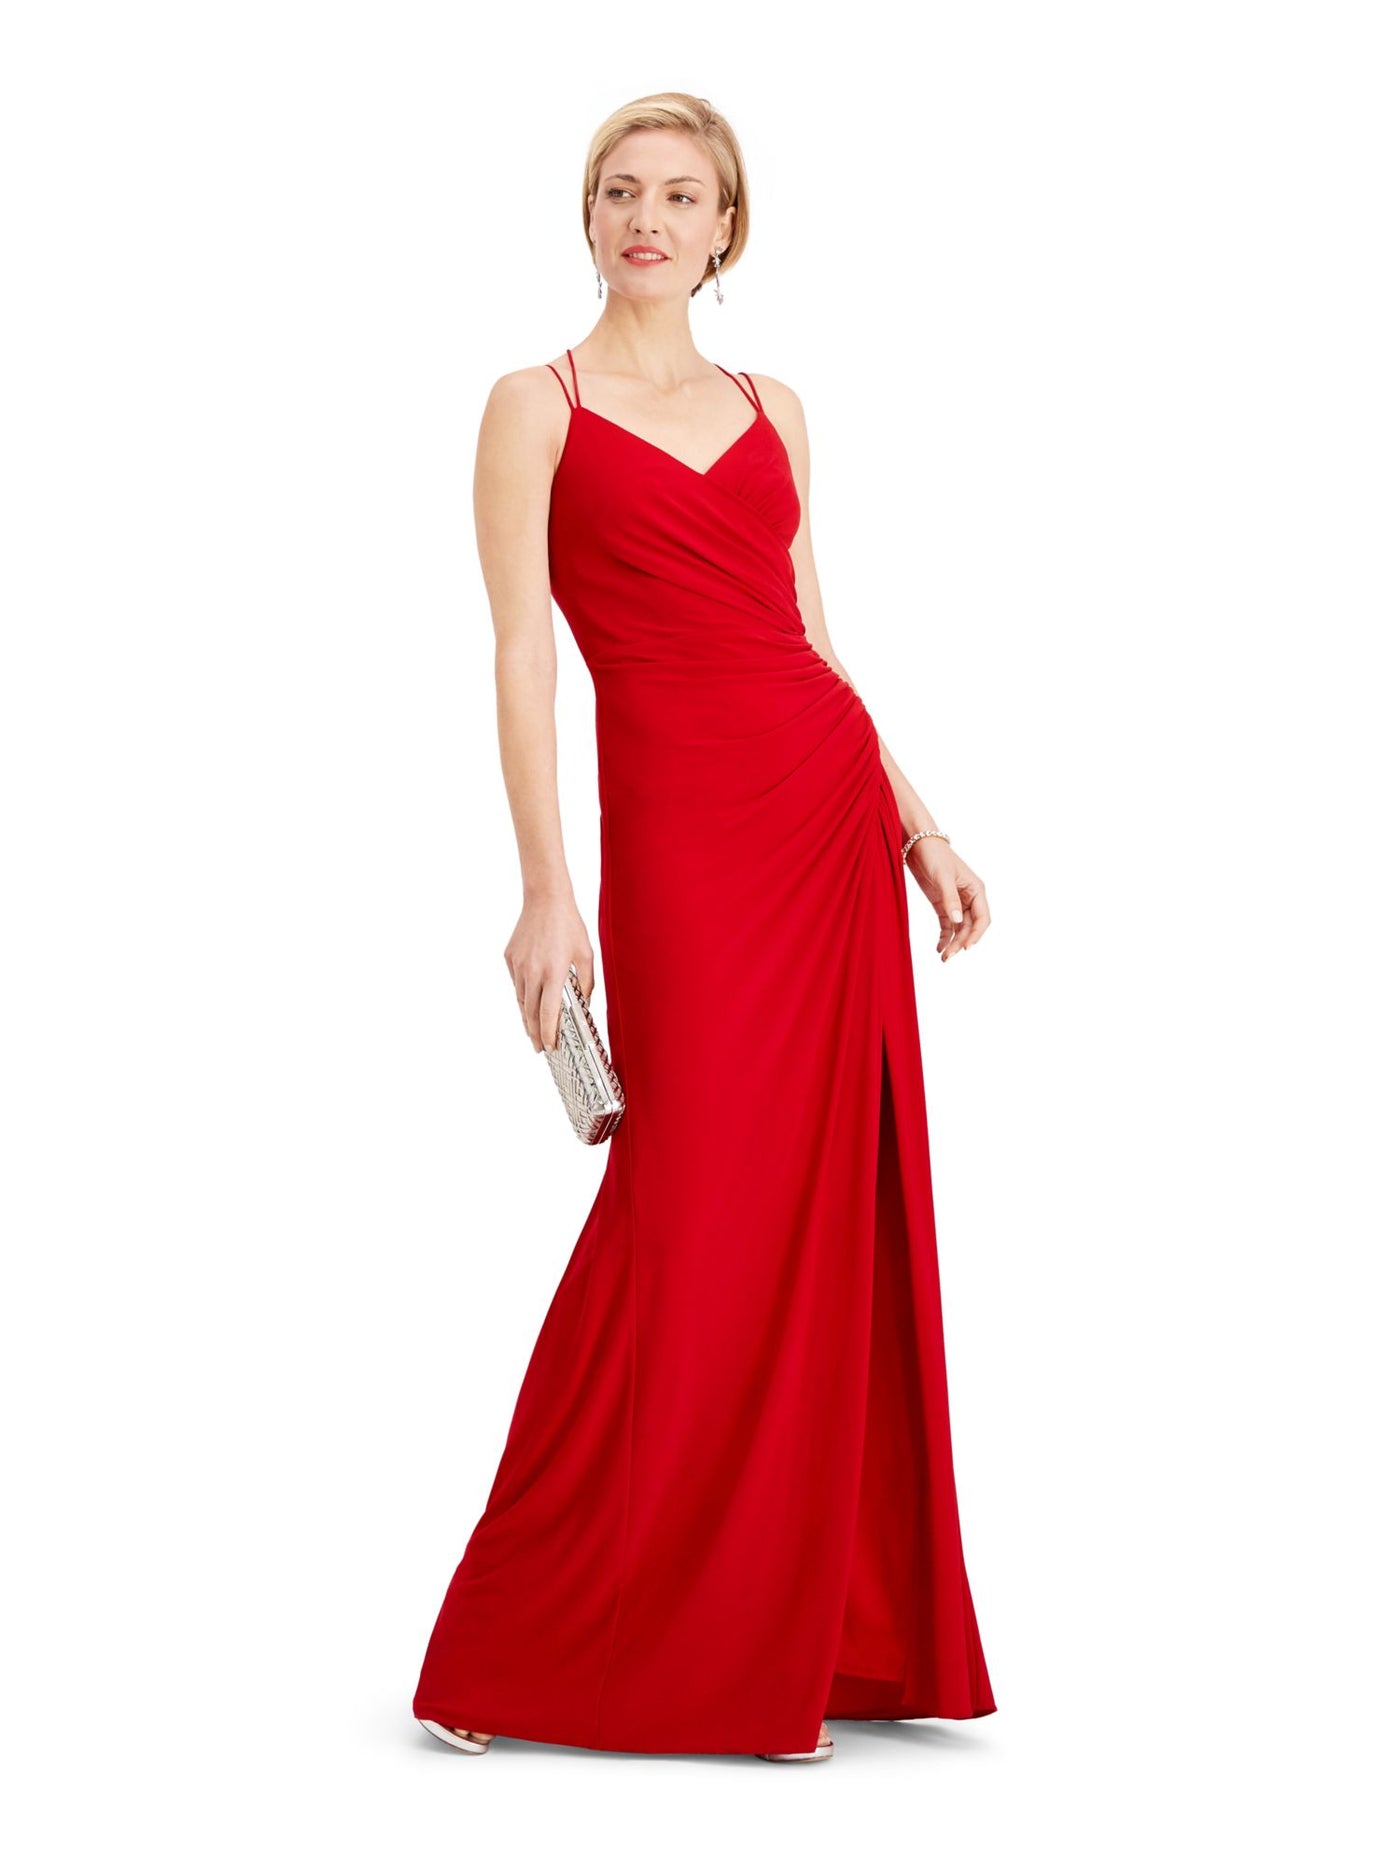 ADRIANNA PAPELL Womens Red Ruched Zippered Spaghetti Strap V Neck Full-Length Formal Fit + Flare Dress 6